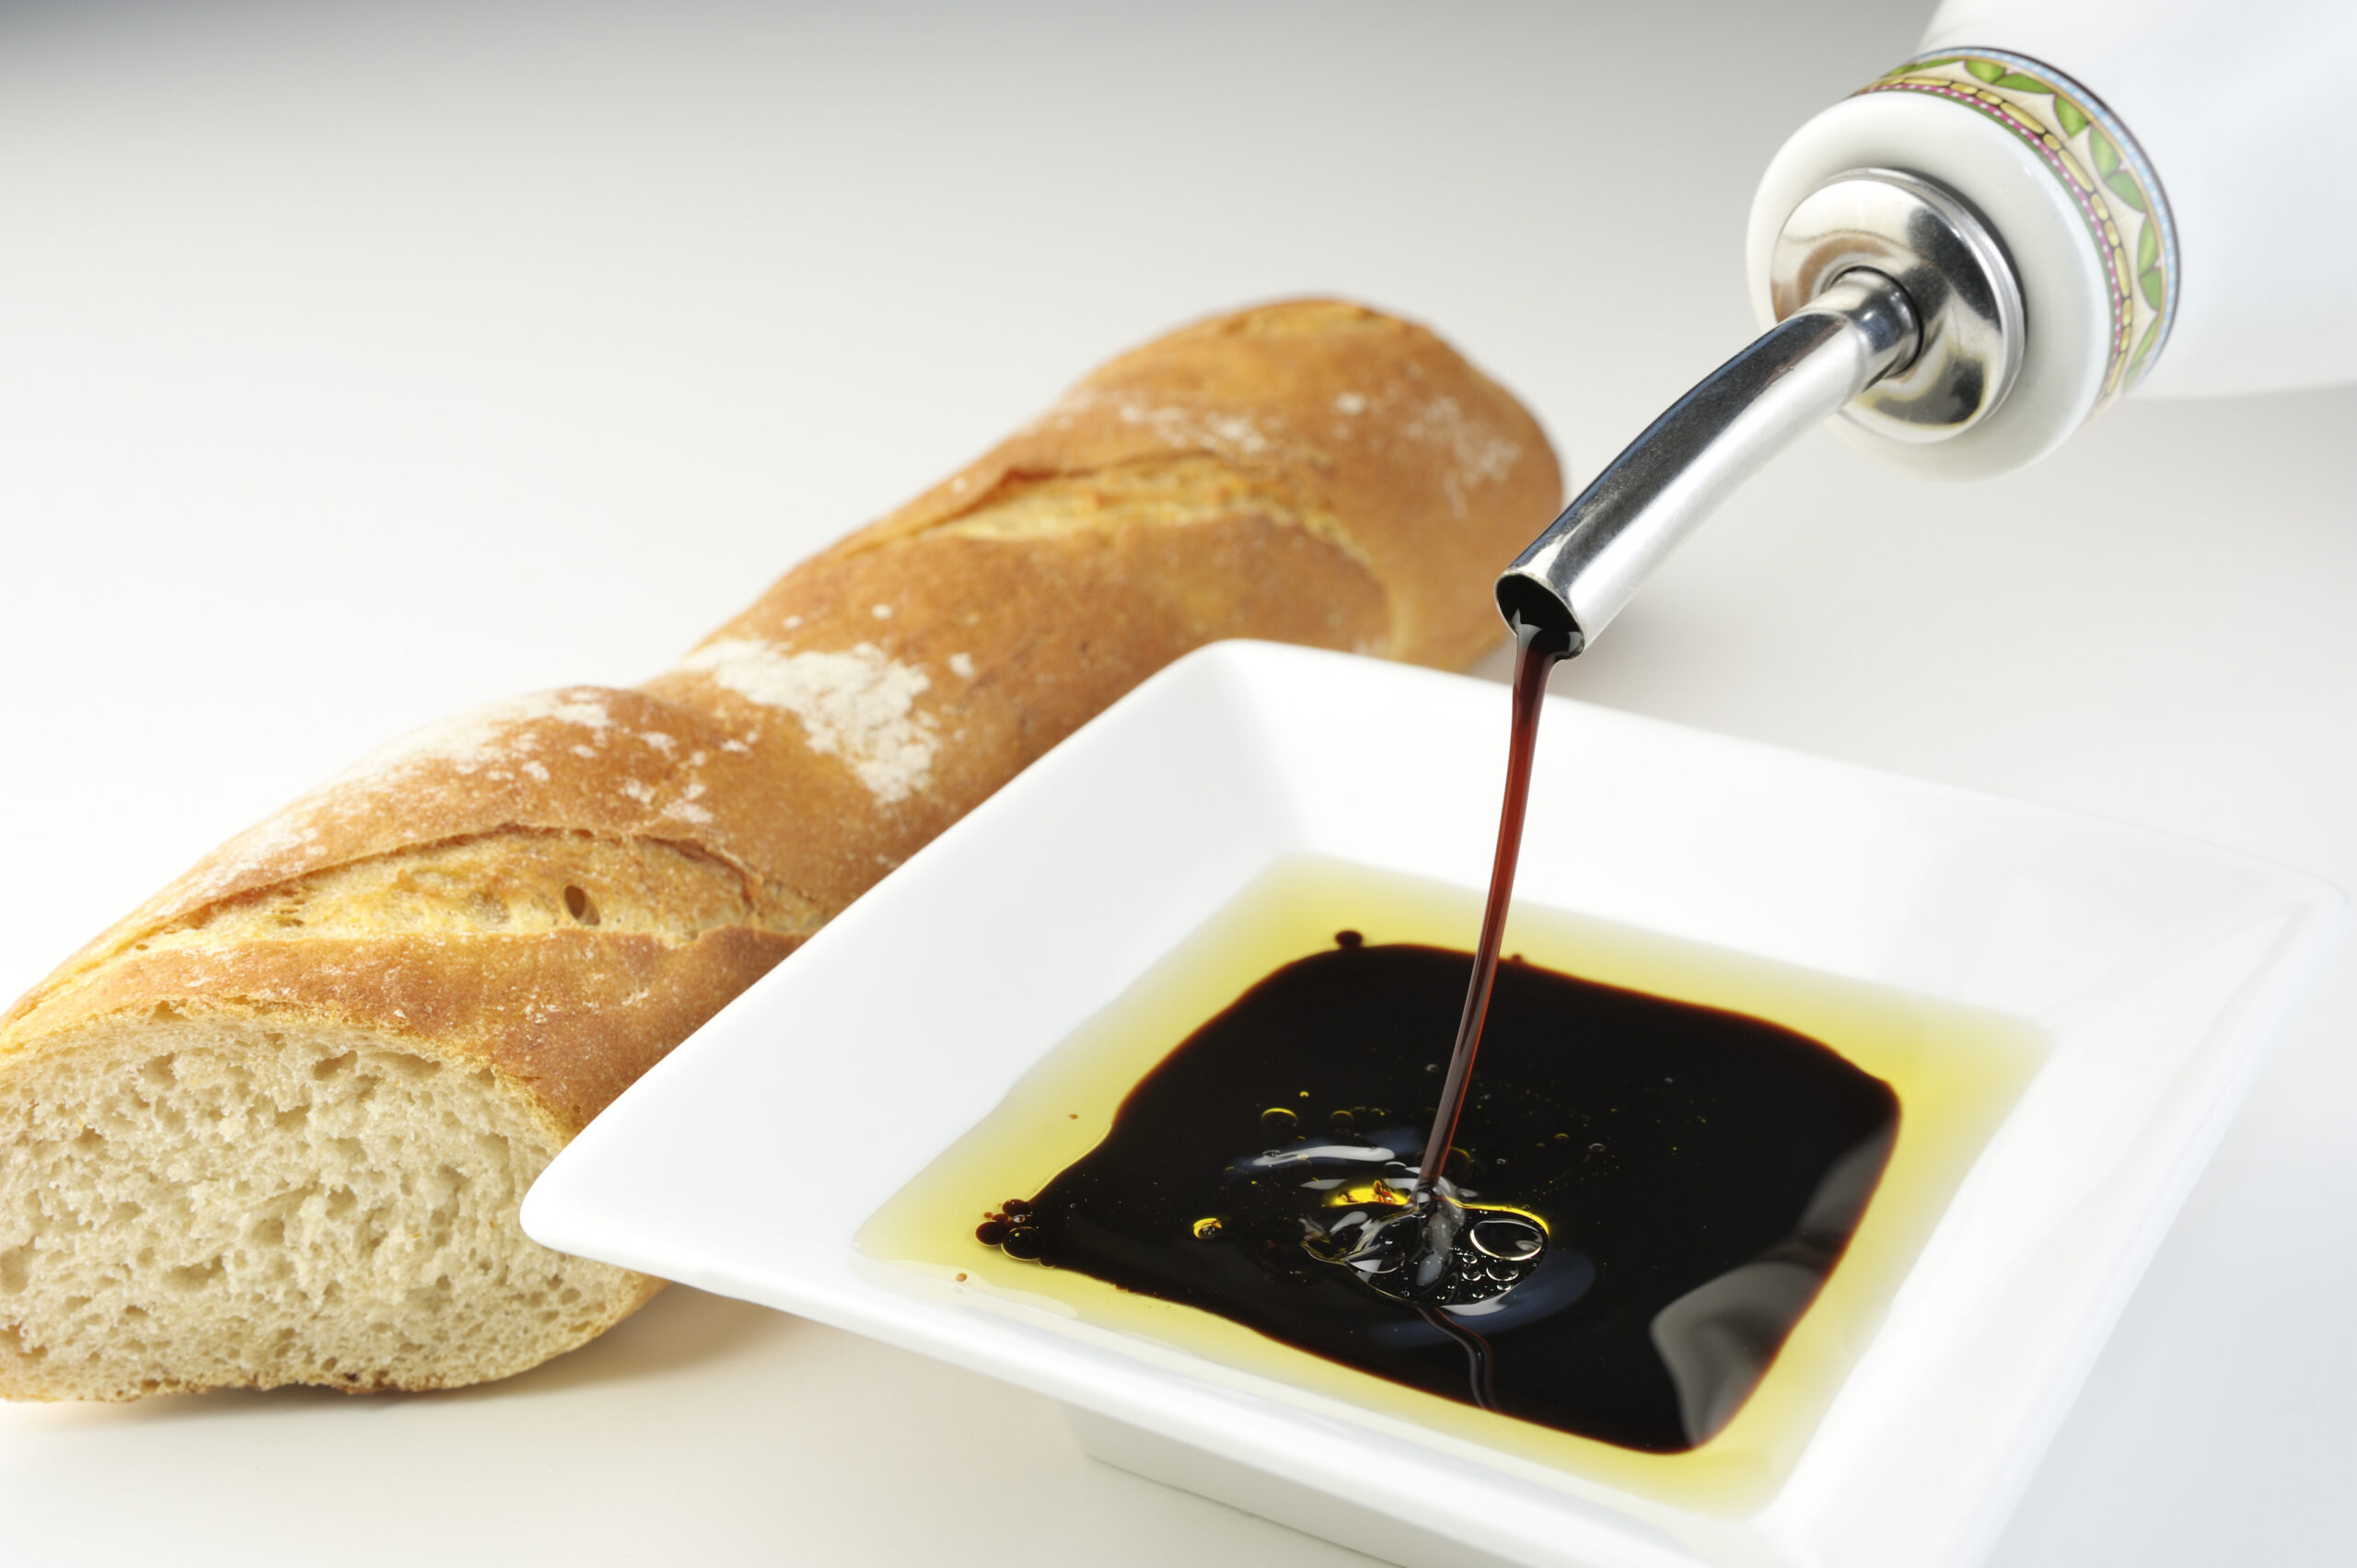 Oil,vinegar, and bread for healthy snacking.  Click to view similar images.